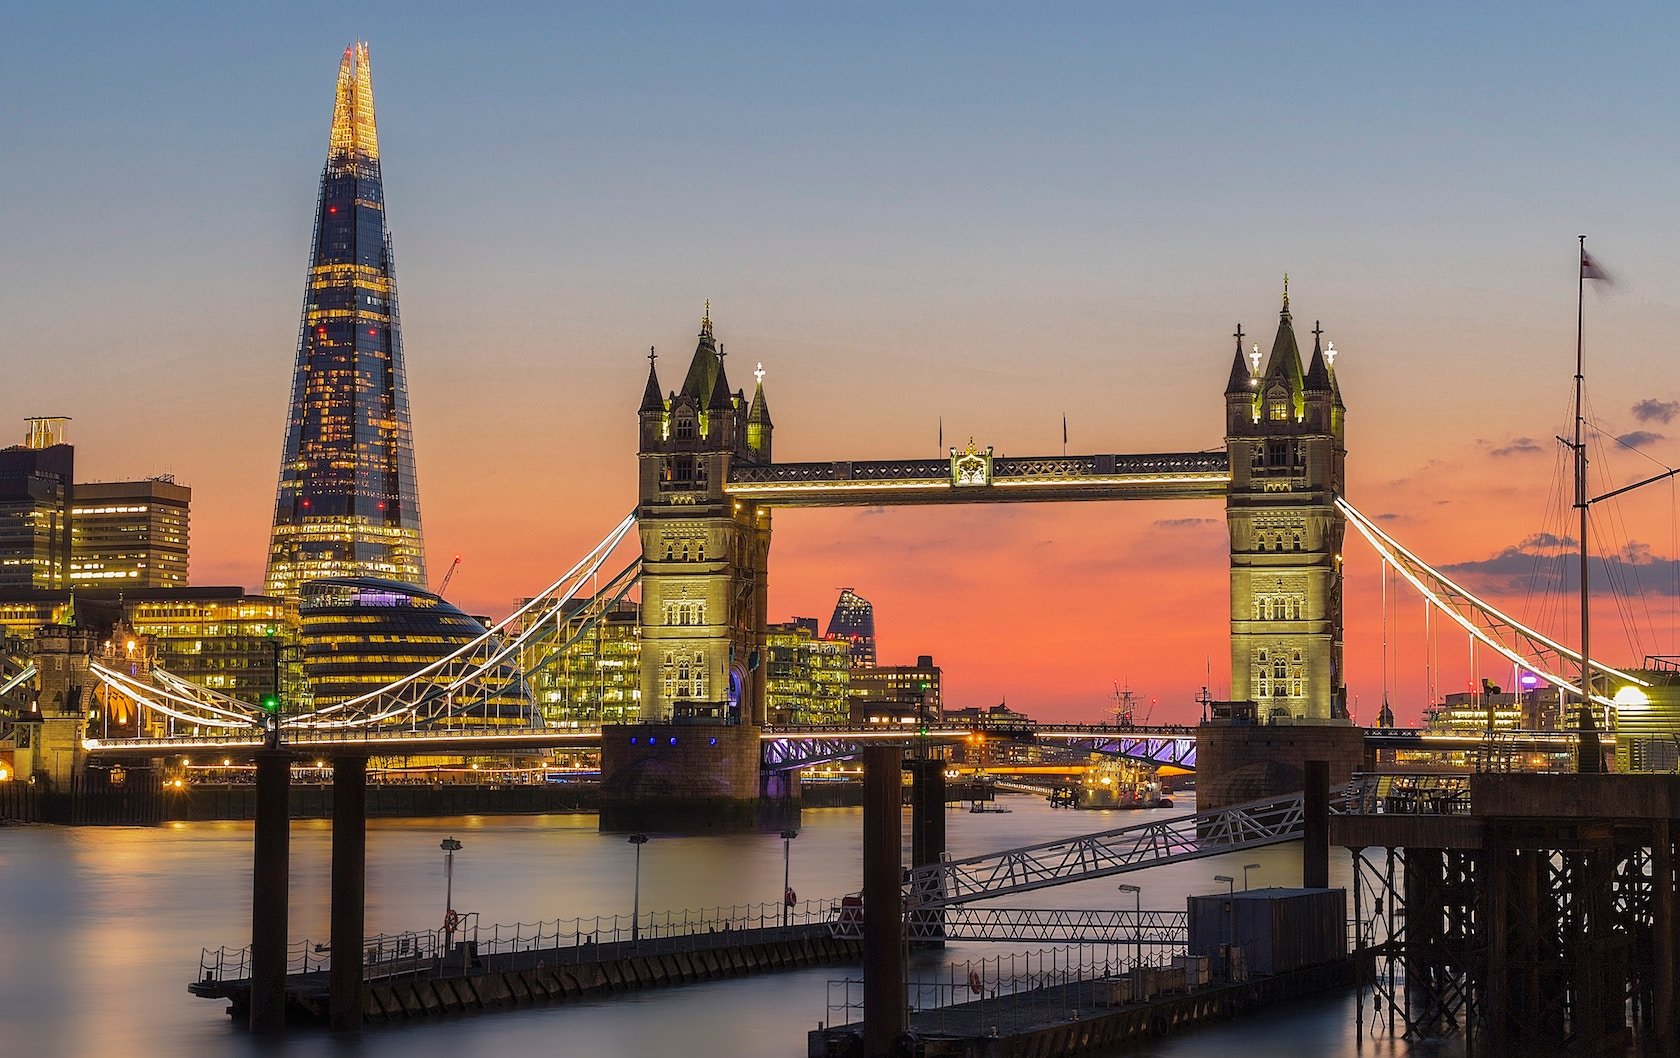 free things to do in london by london perfect